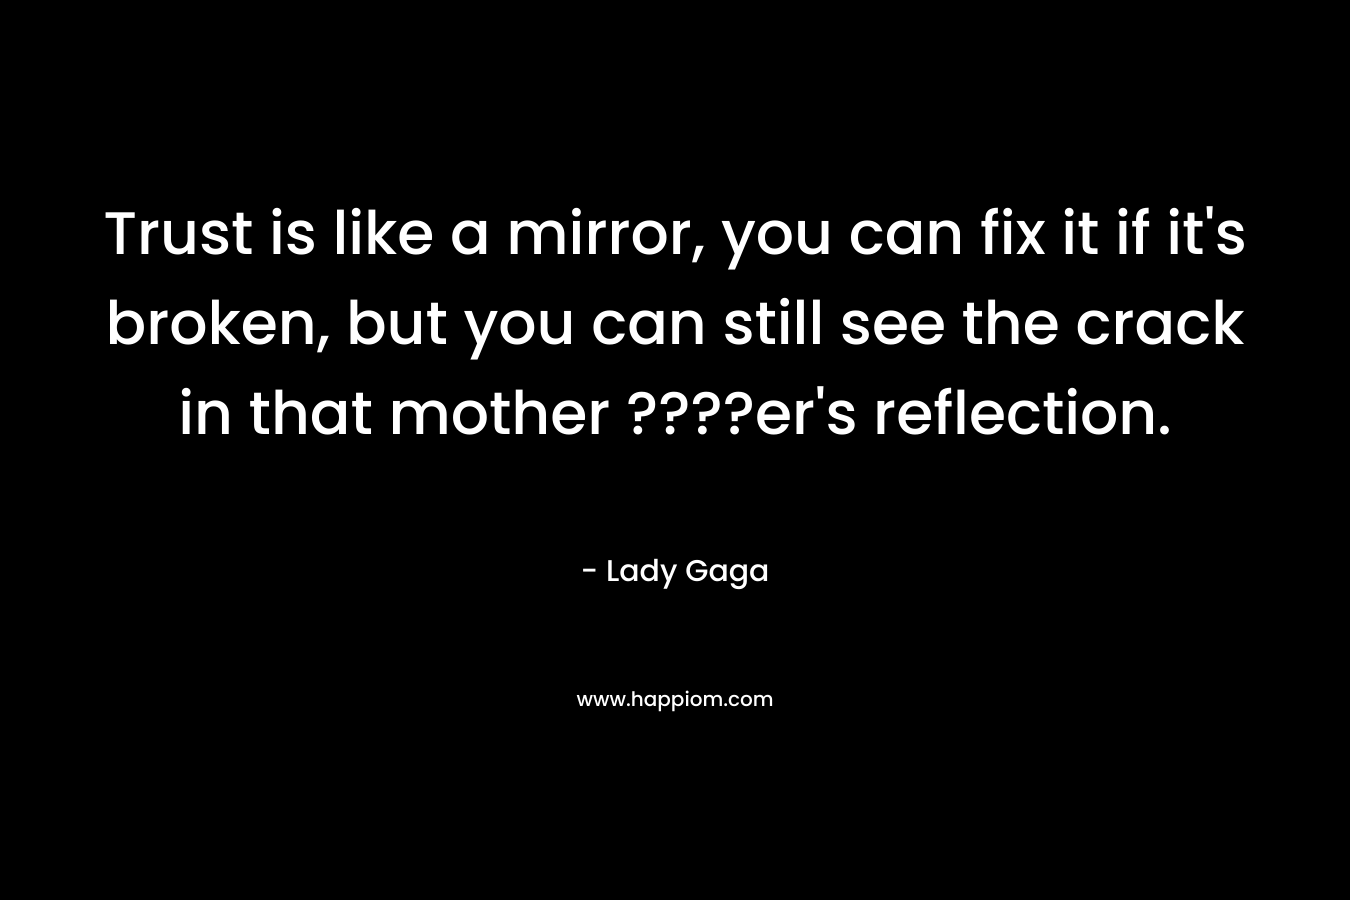 Trust is like a mirror, you can fix it if it's broken, but you can still see the crack in that mother ????er's reflection.